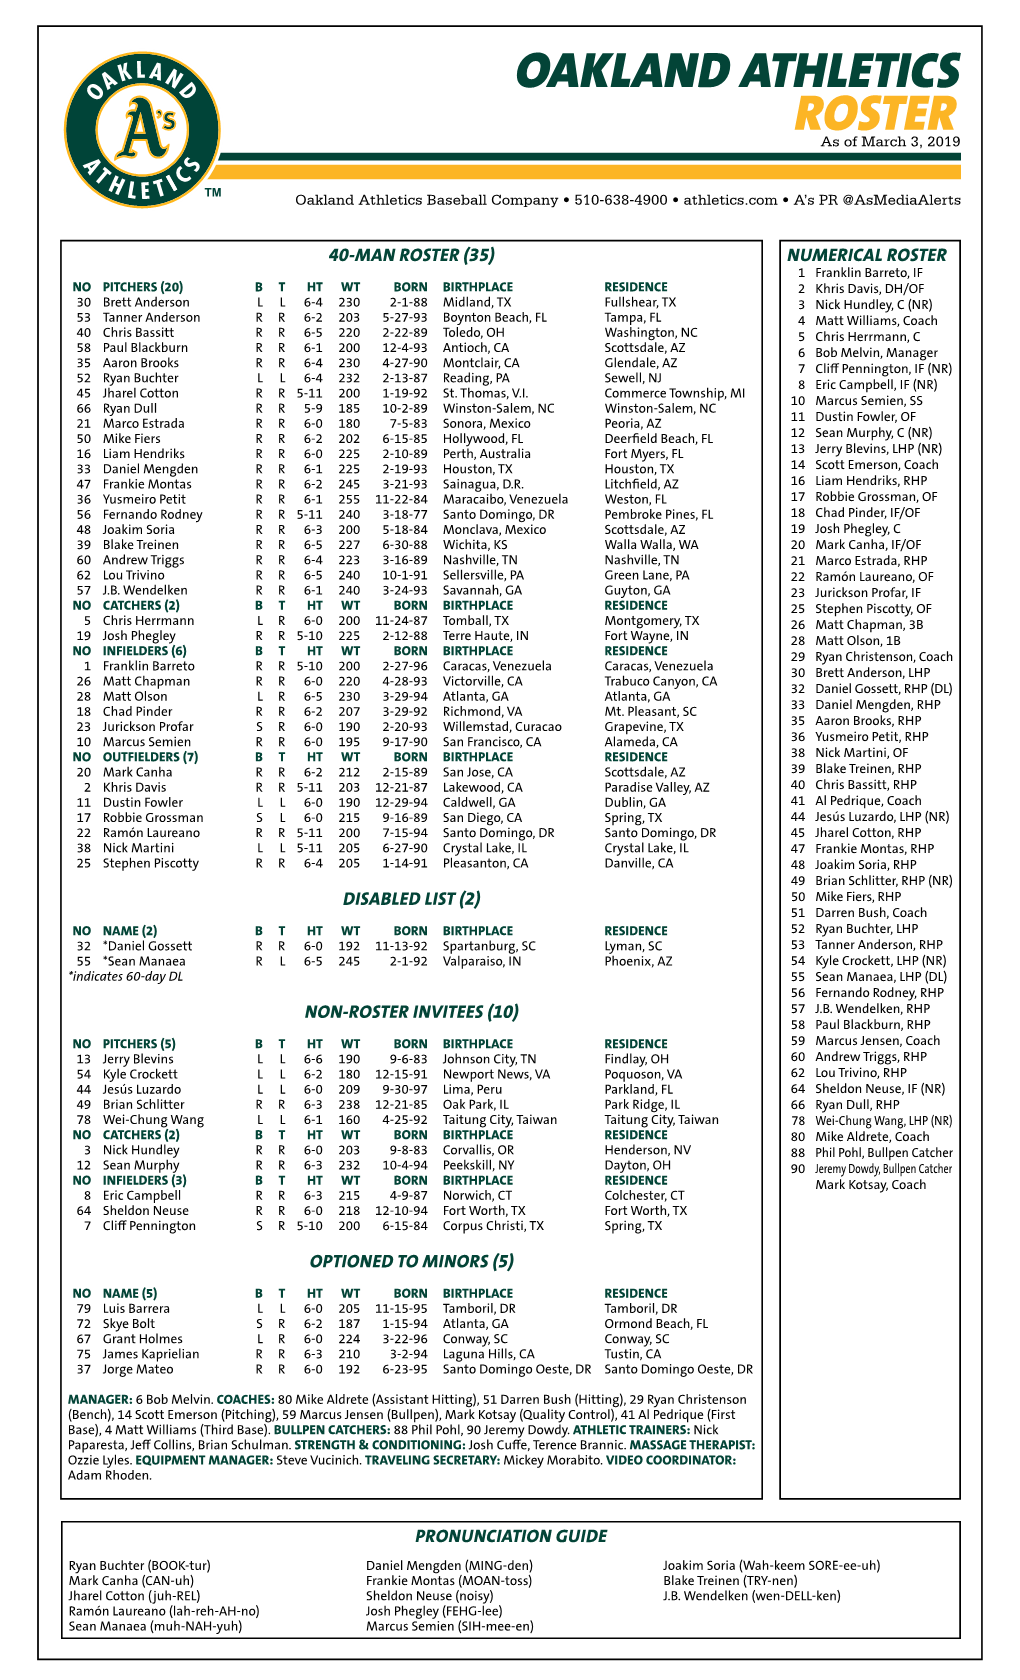 03-03-2019 A's Roster